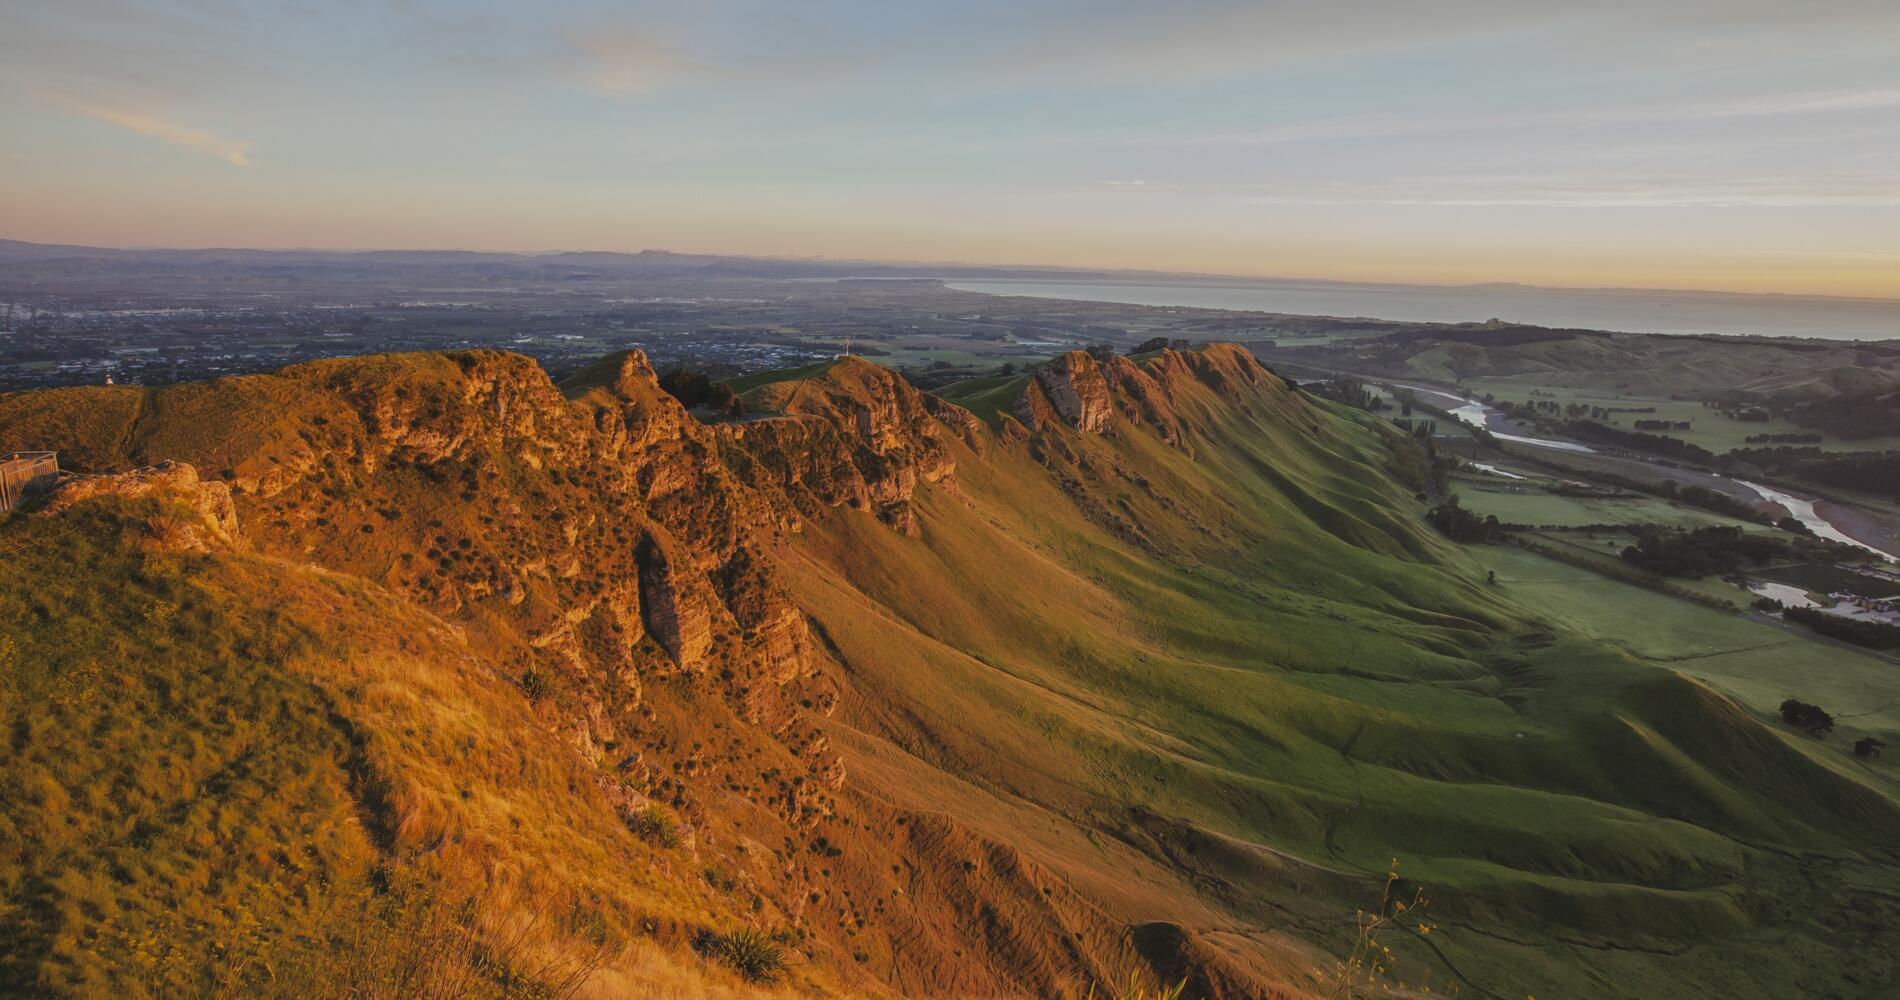 Hawke's Bay - Things to see and do - Wine Country | New Zealand